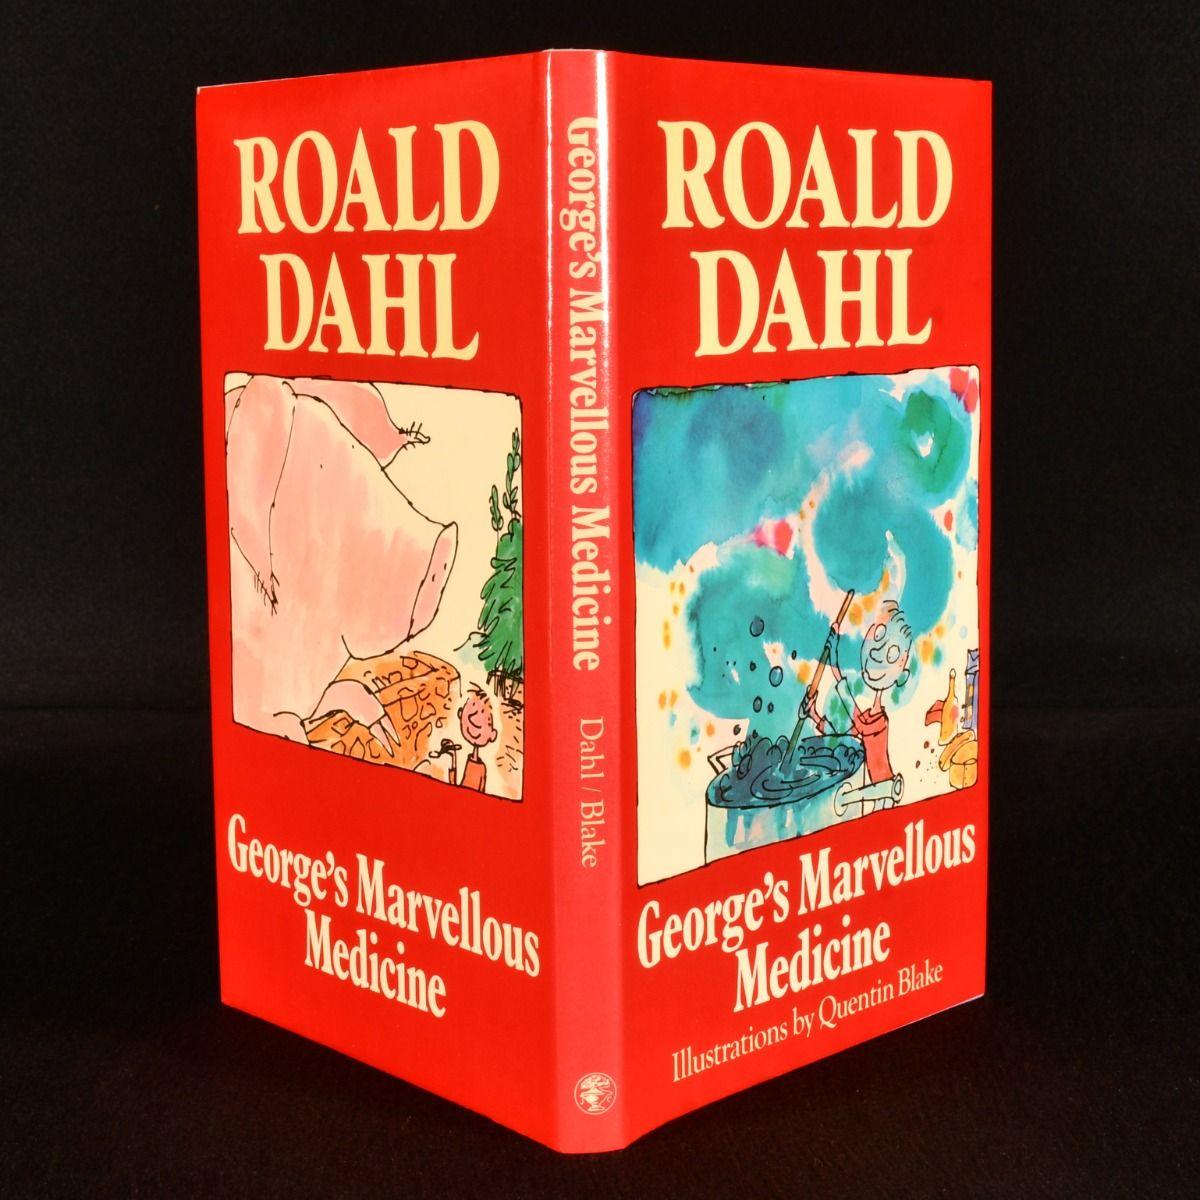 A fine first edition of Roald Dahl's beloved children's novel about a boy named George, who replaces his grandmother's medicine with a hazardous concoction.

The first edition, first impression, in the publisher's original price unclipped dust